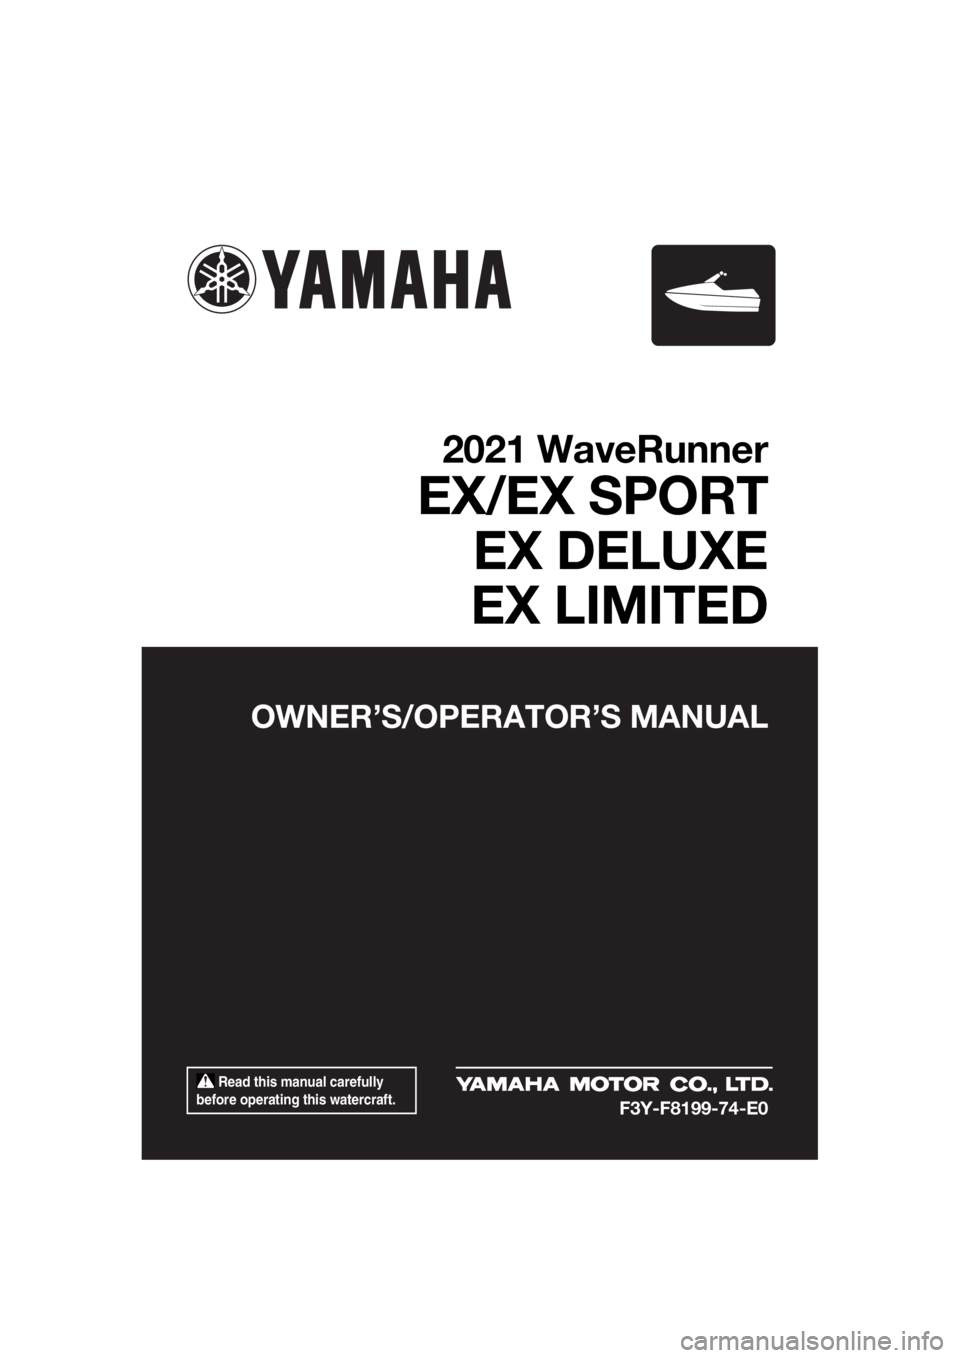 YAMAHA EX DELUXE 2021  Owners Manual  Read this manual carefully 
before operating this watercraft.
OWNER’S/OPERAT OR’S MANUAL
2021 WaveRunner
EX/EX SPORT
EX DELUXE
EX LIMITED
F3Y-F8199-74-E0
UF3Y74E0.book  Page 1  Monday, June 22, 2